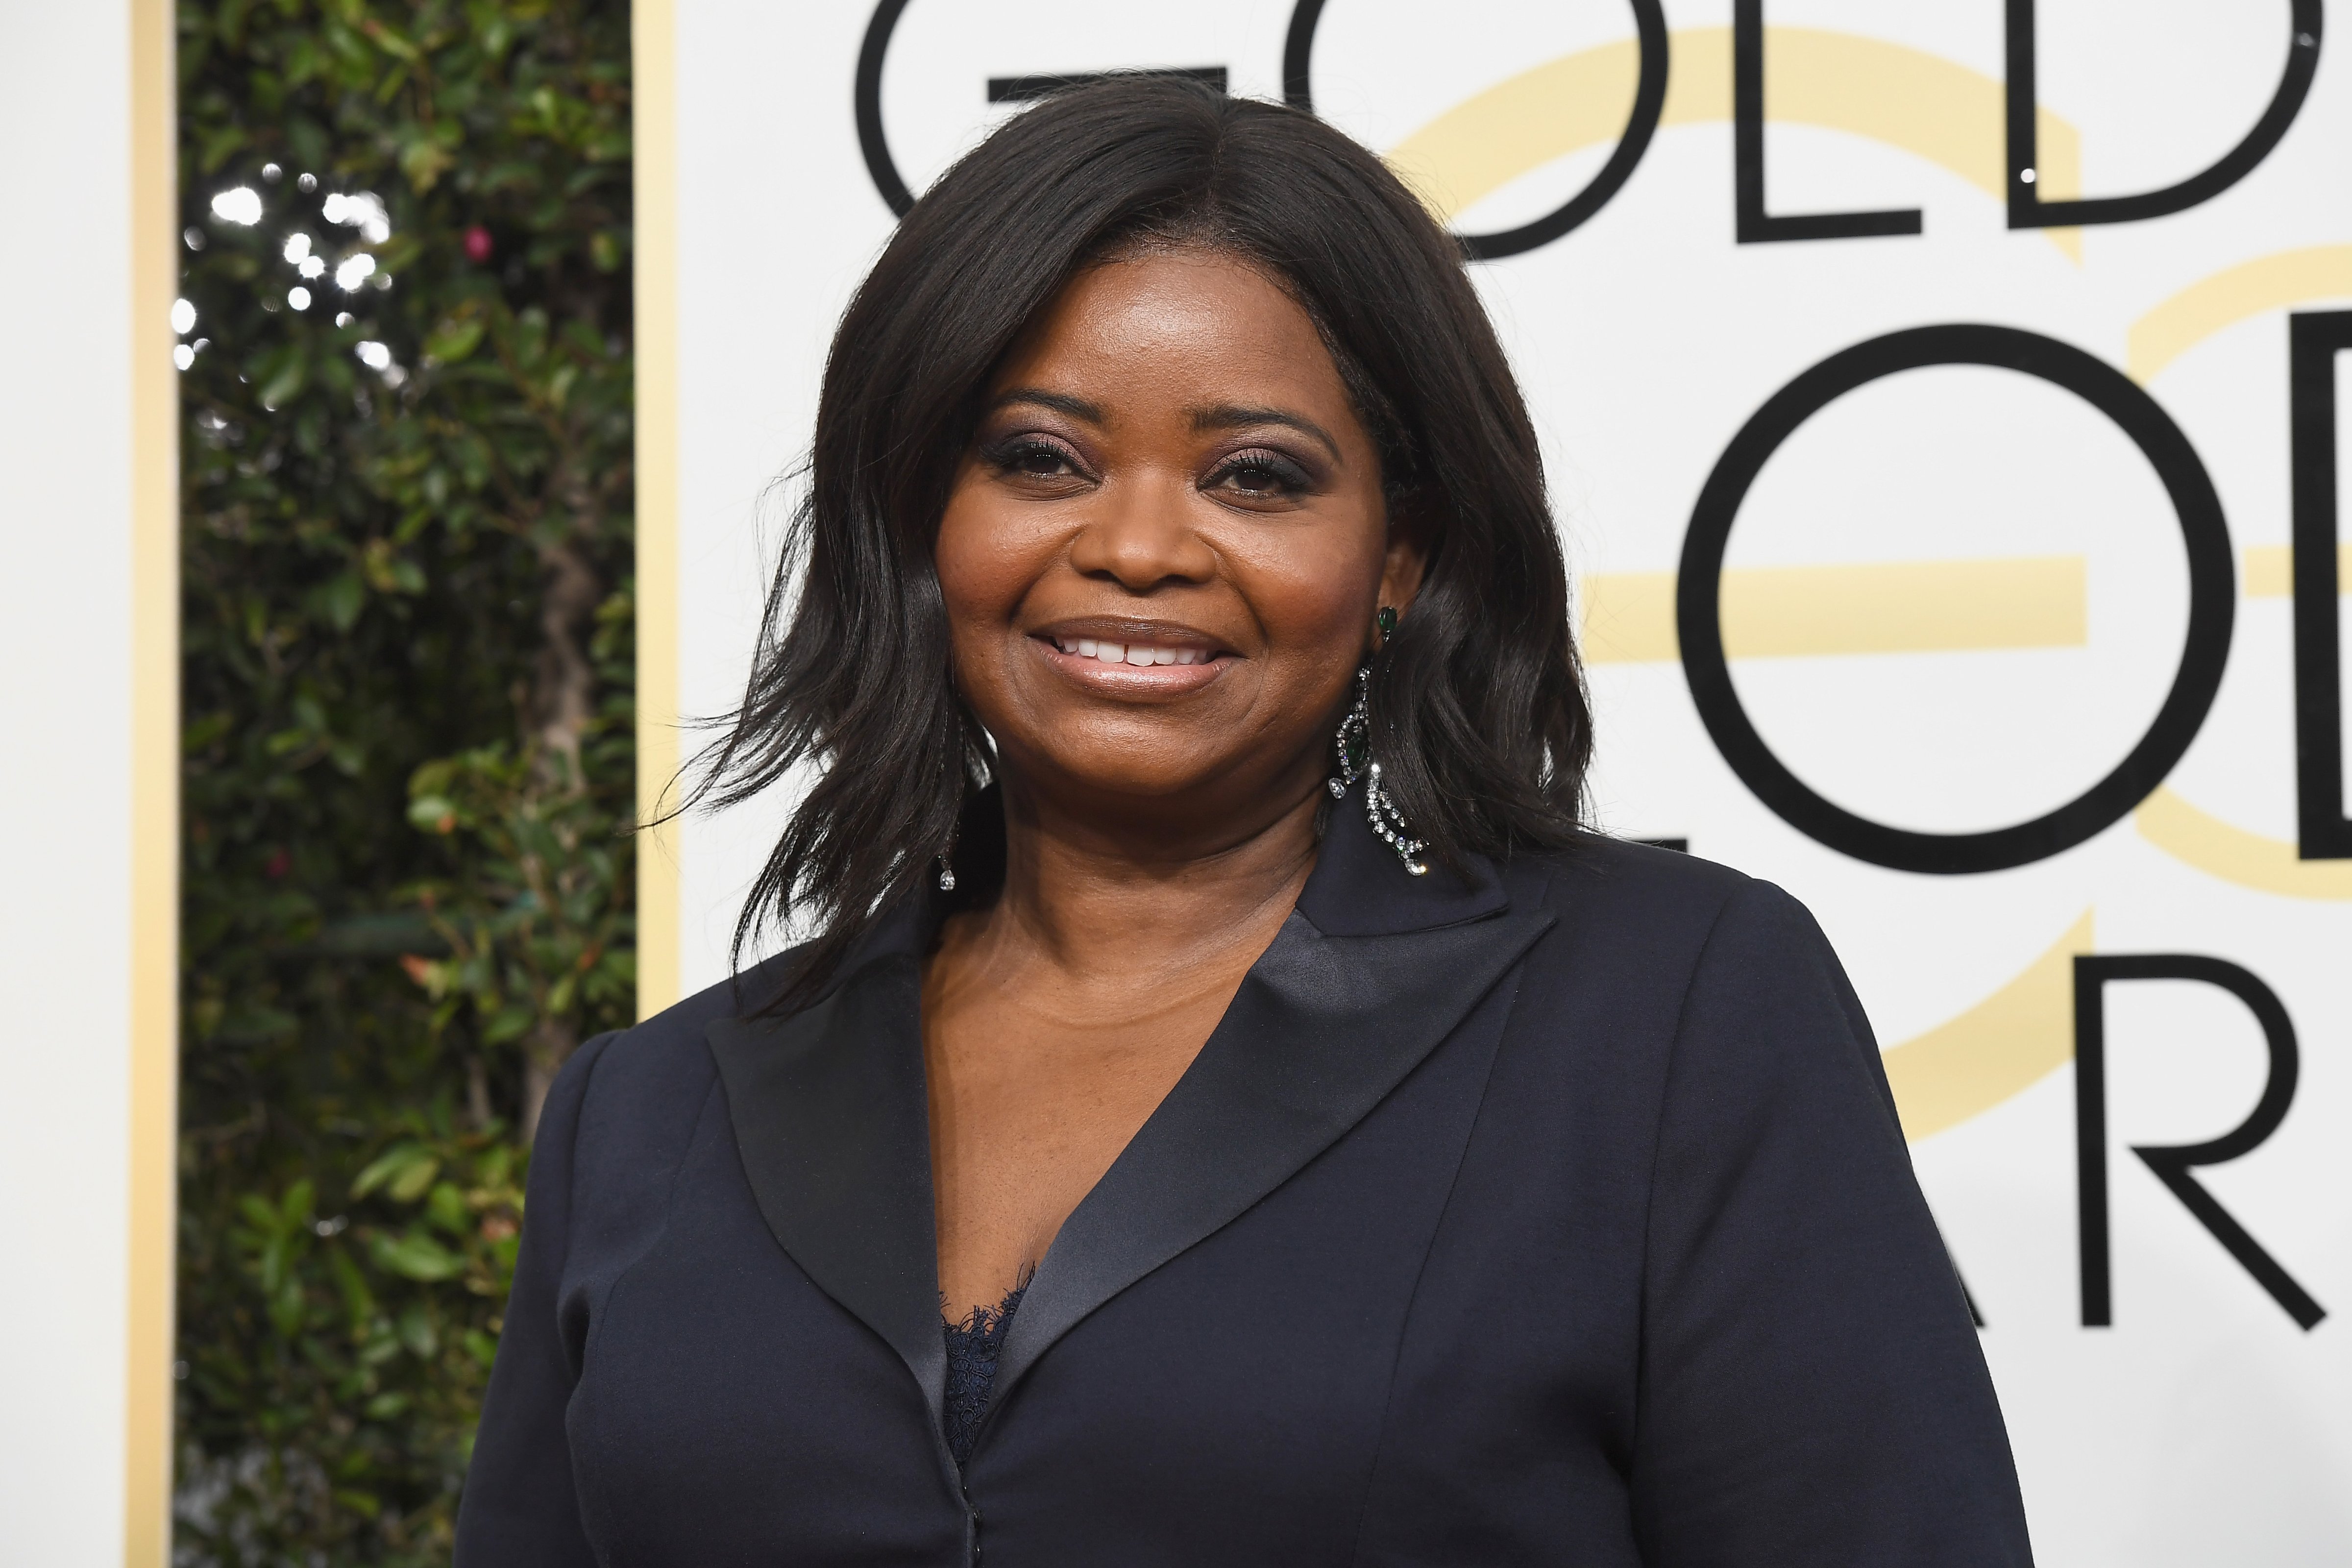 BEVERLY HILLS, CA - JANUARY 08:  74th ANNUAL GOLDEN GLOBE AWARDS -- Pictured: Actress Octavia Spencer arrives to the 74th Annual Golden Globe Awards held at the Beverly Hilton Hotel on January 8, 2017.  (Photo by Kevork Djansezian/NBC/NBCU Photo Bank via Getty Images) (Kevork Djansezian/NBC—NBCU Photo Bank via Getty Images via Getty Images)